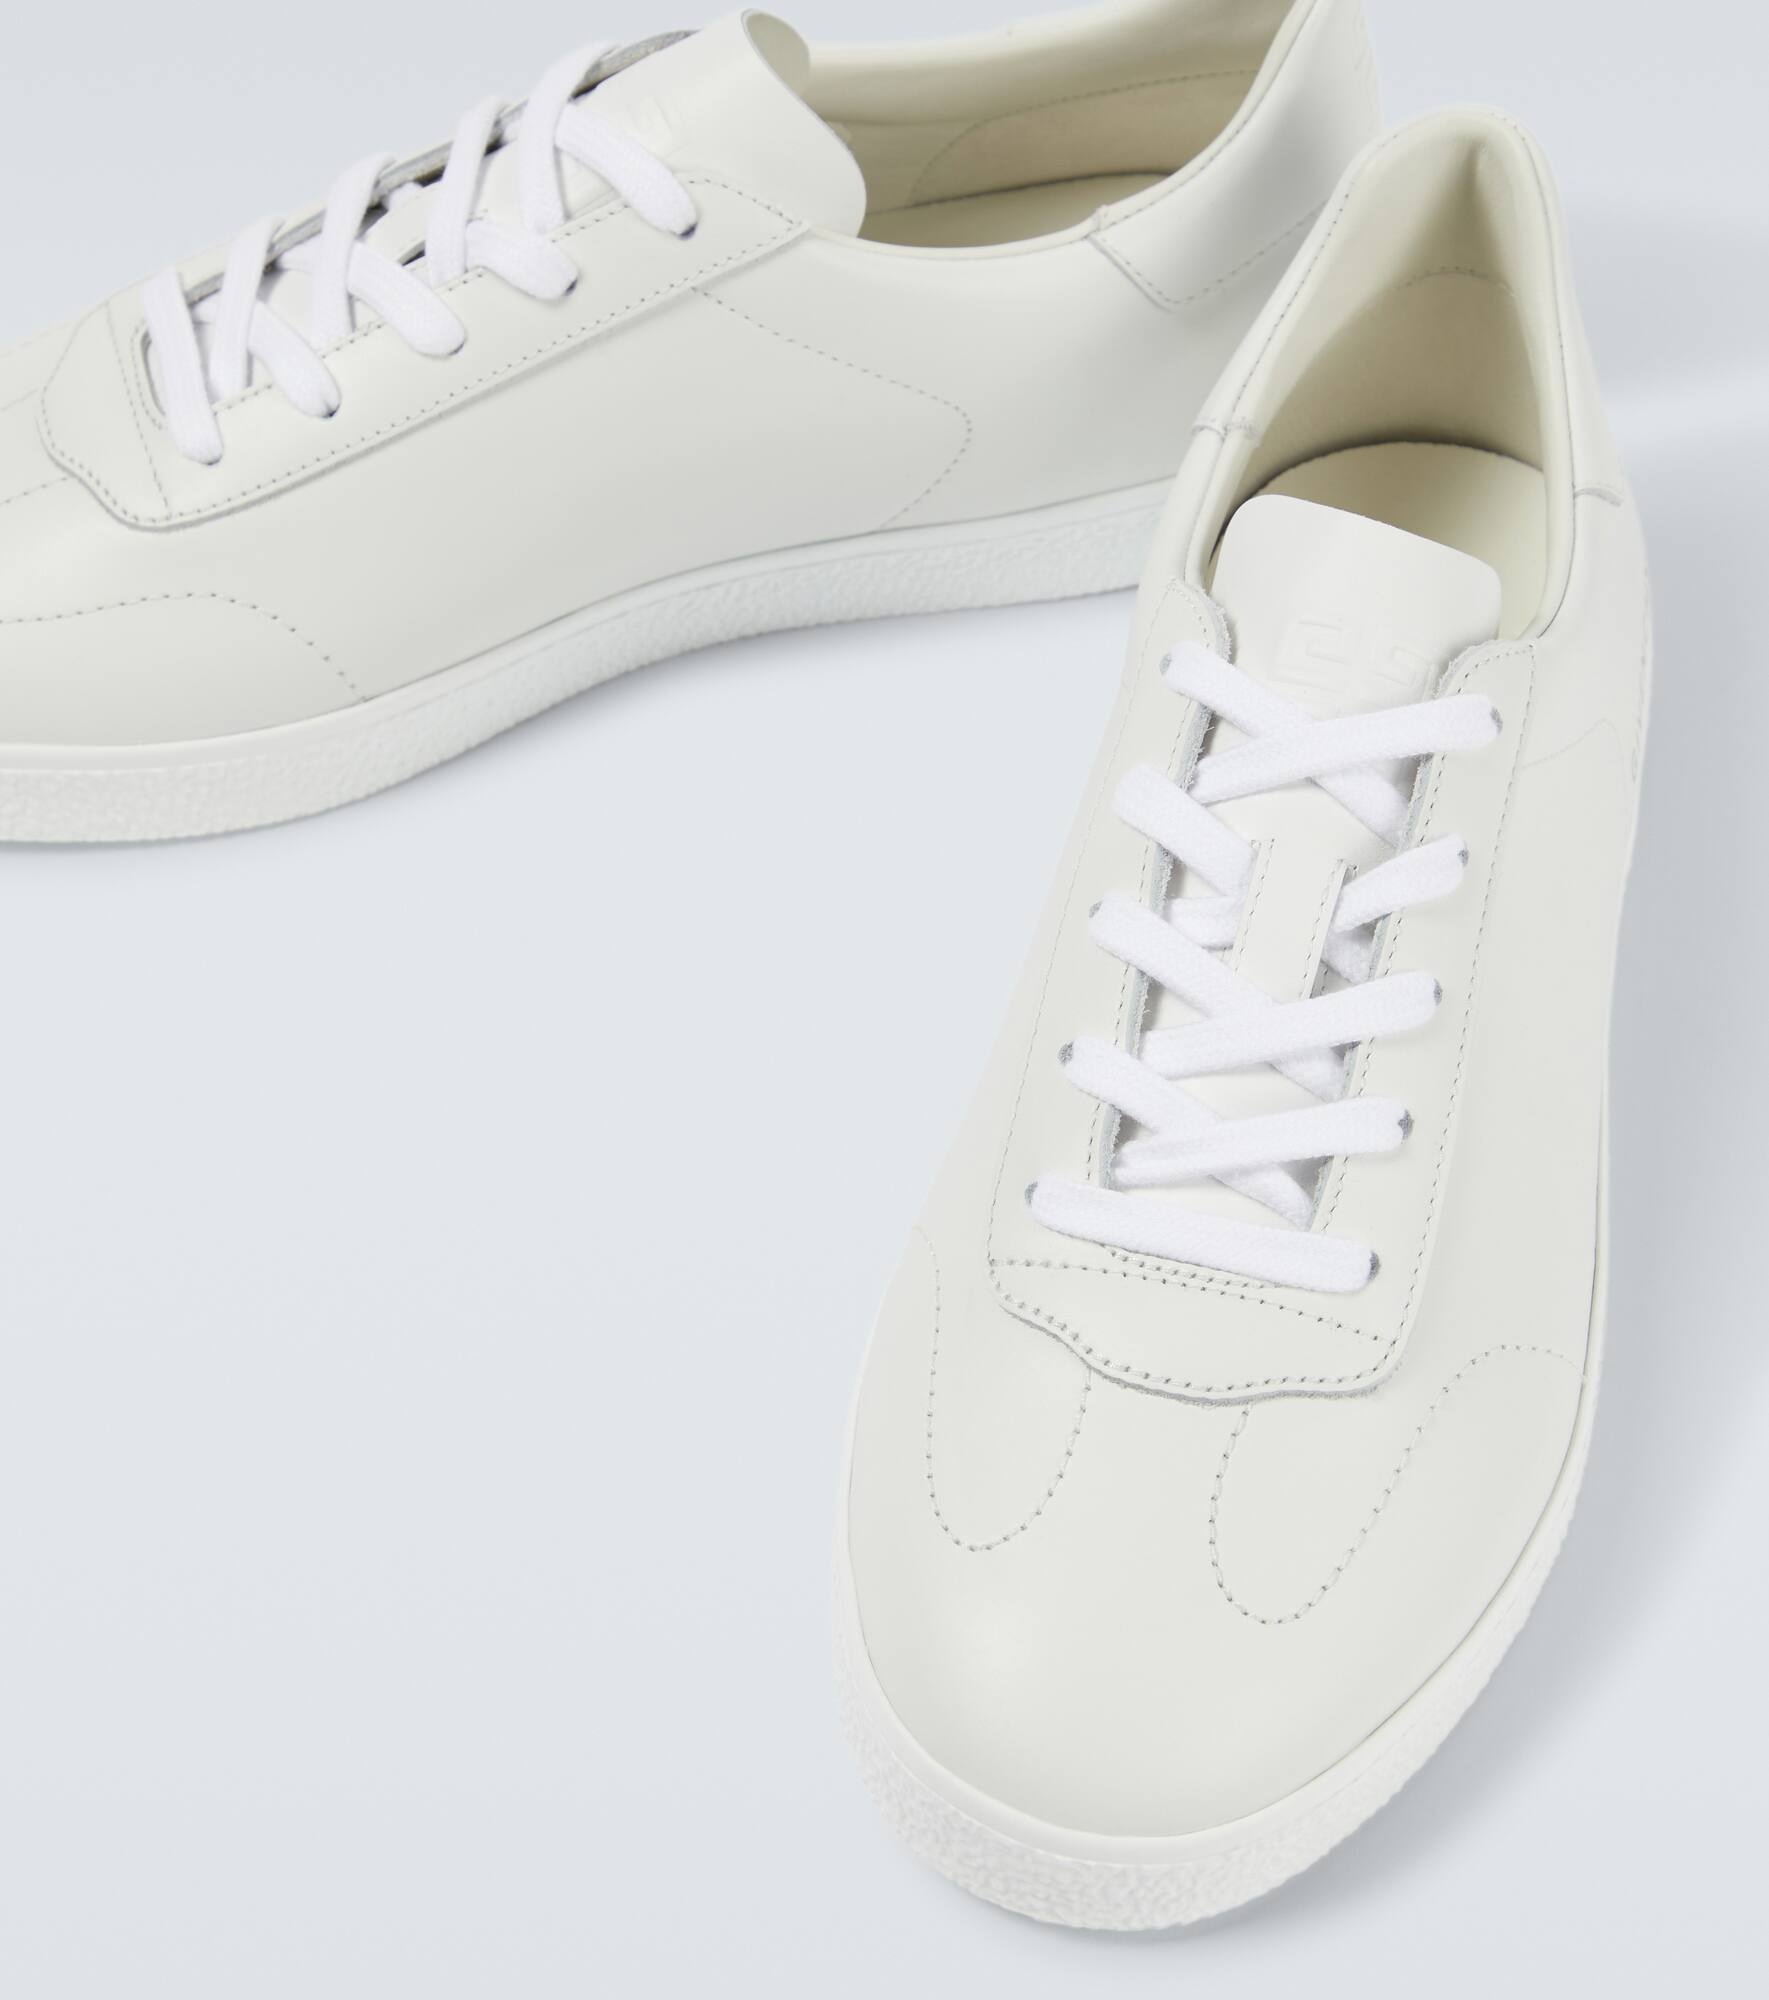 Town leather sneakers - 3